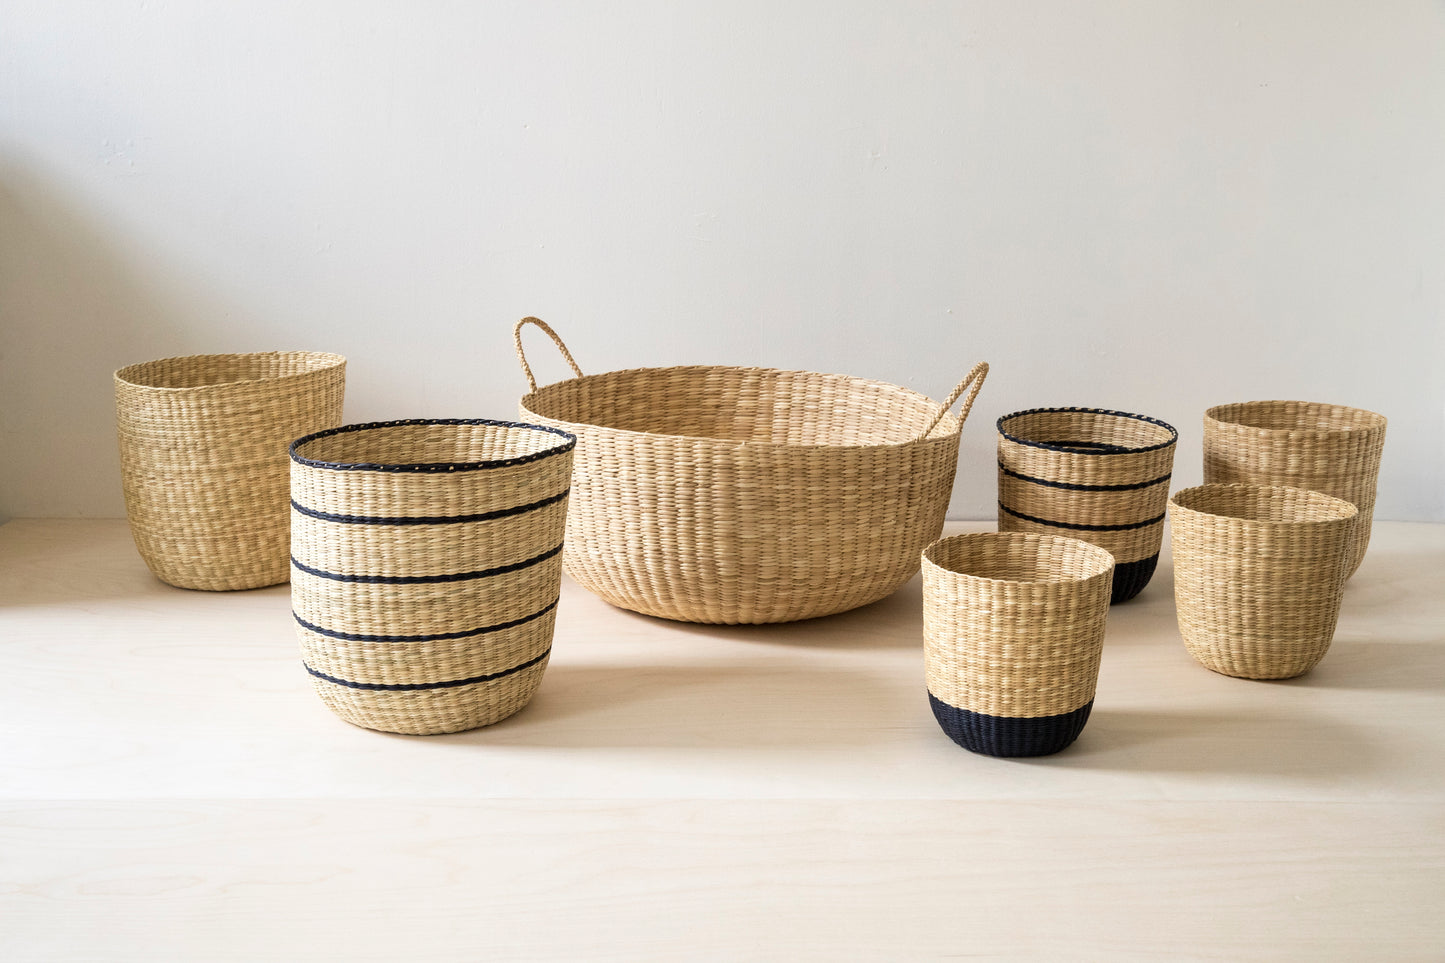 Intiearth Nesting Baskets in natural and black. Giving floor baskets. Creative home storage containers.